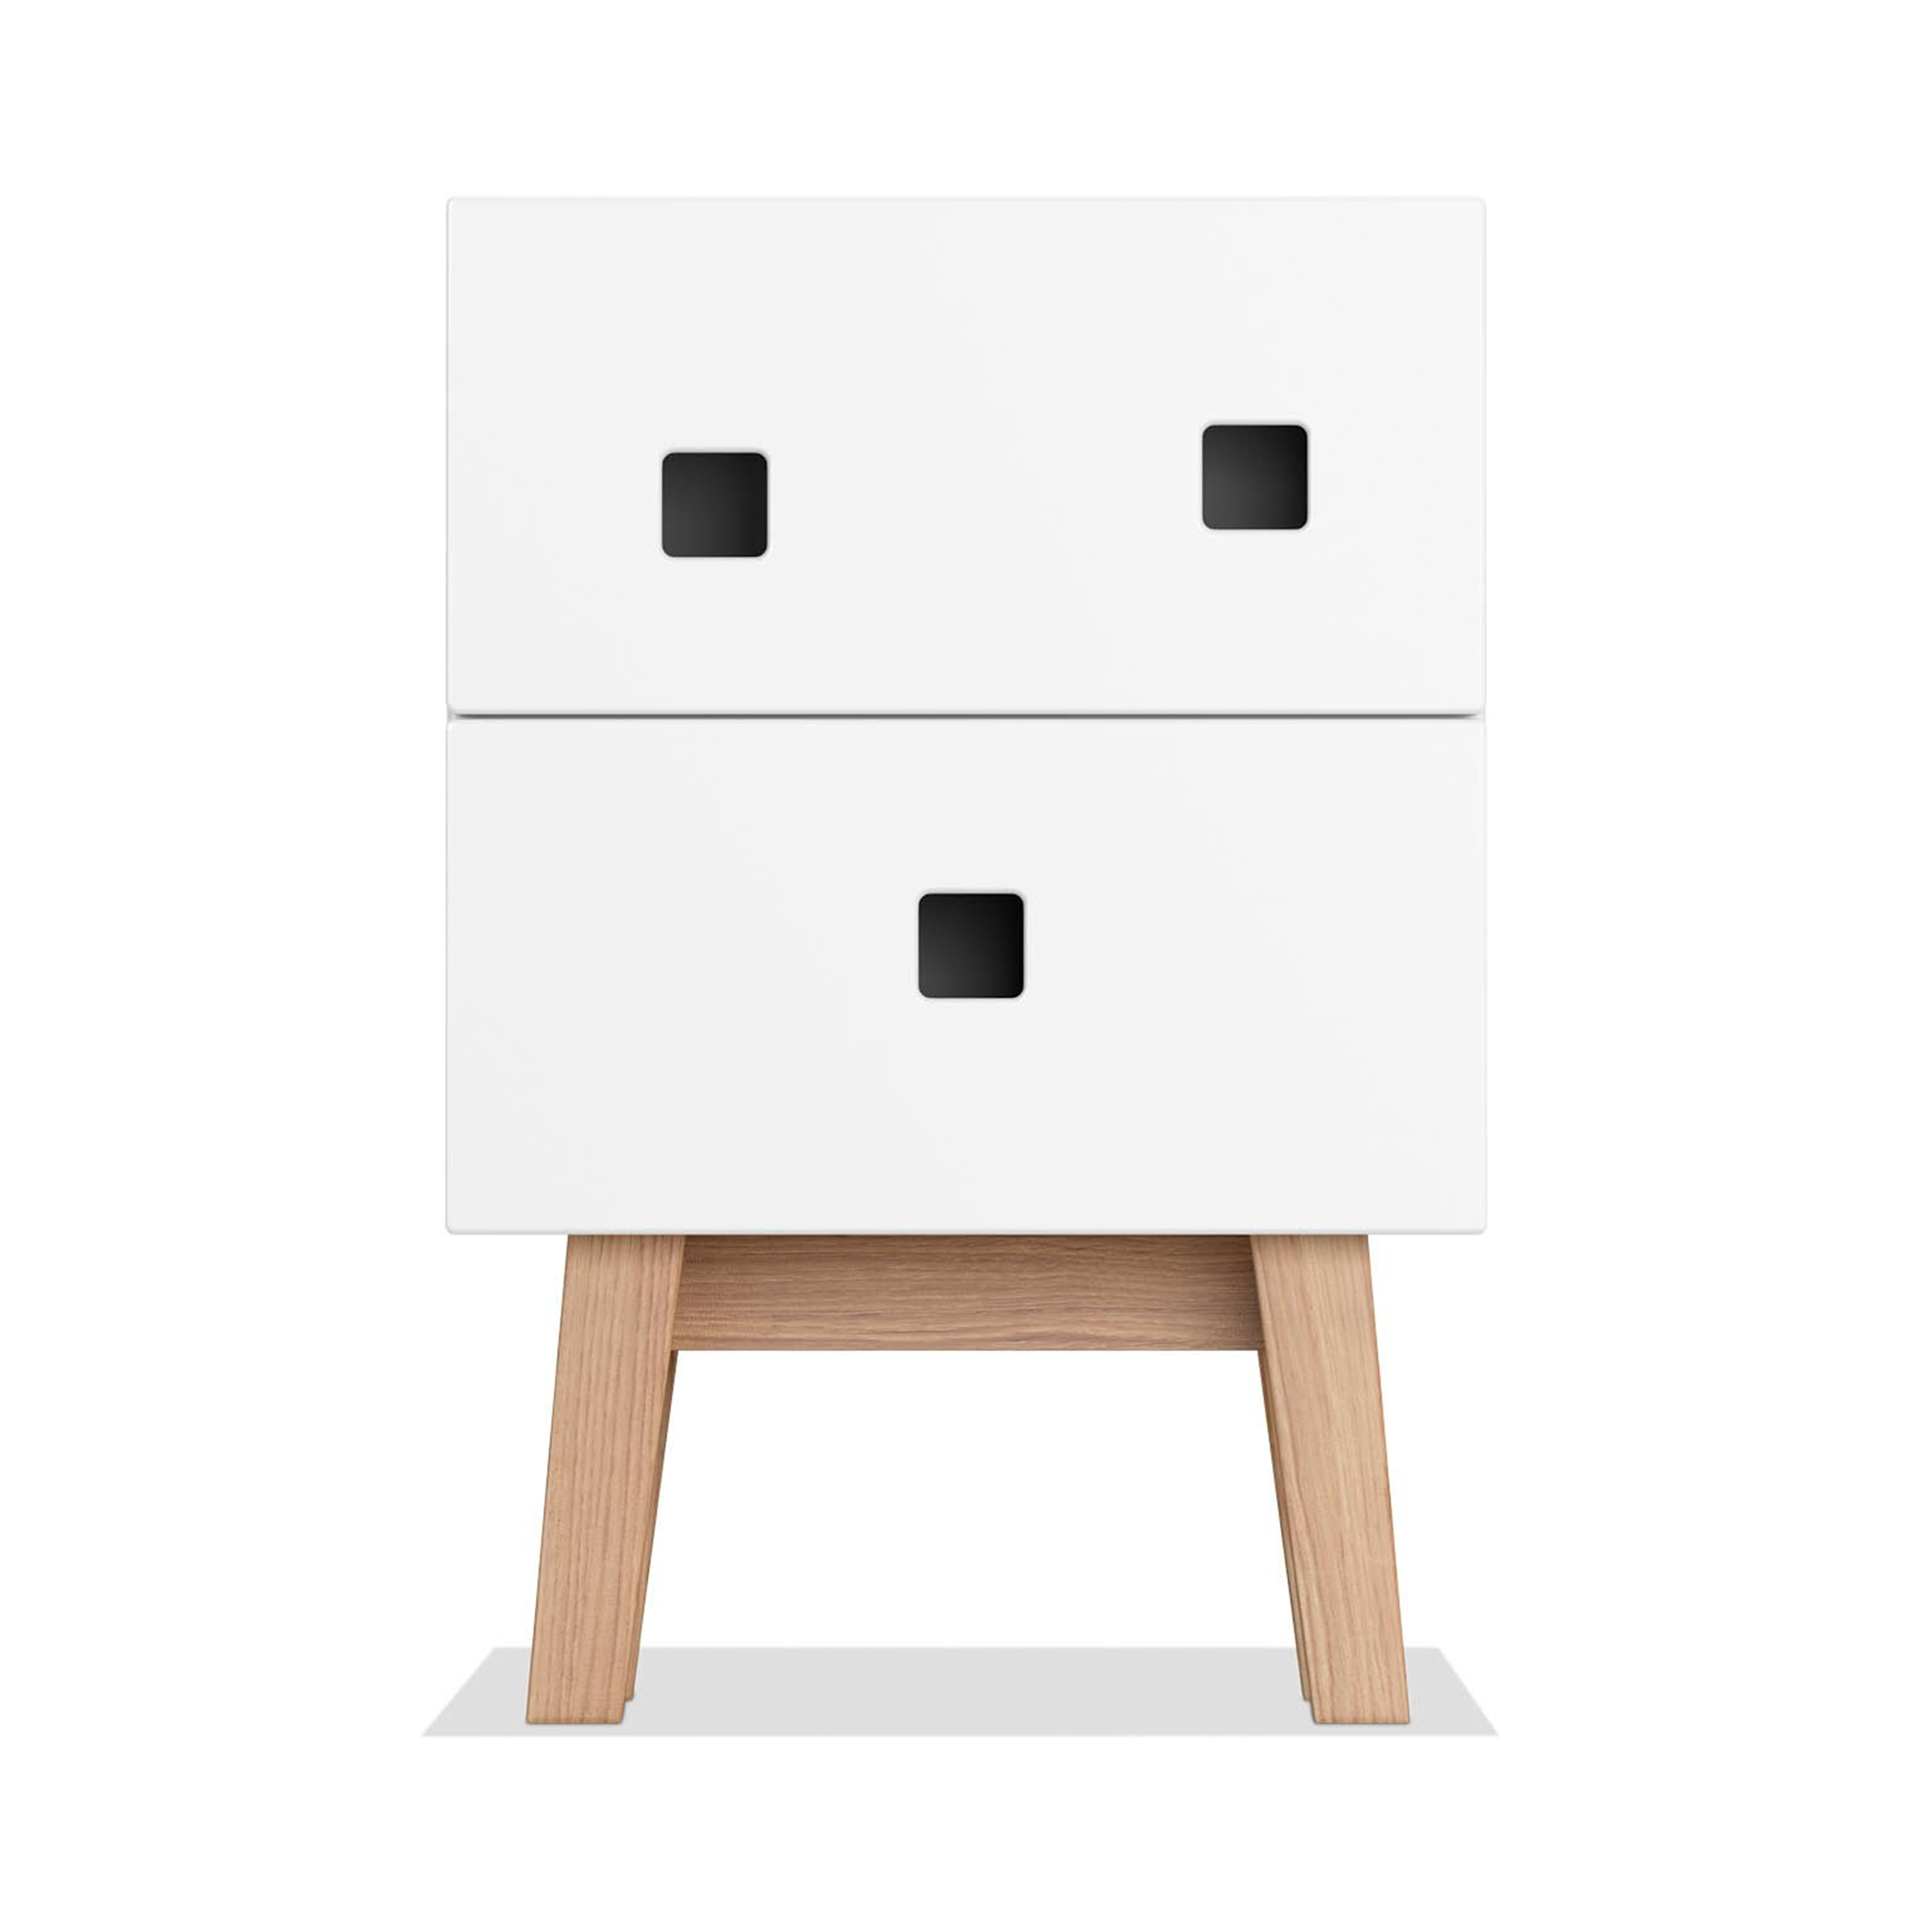 Peep S1 Bedside Cabinet by Zweed